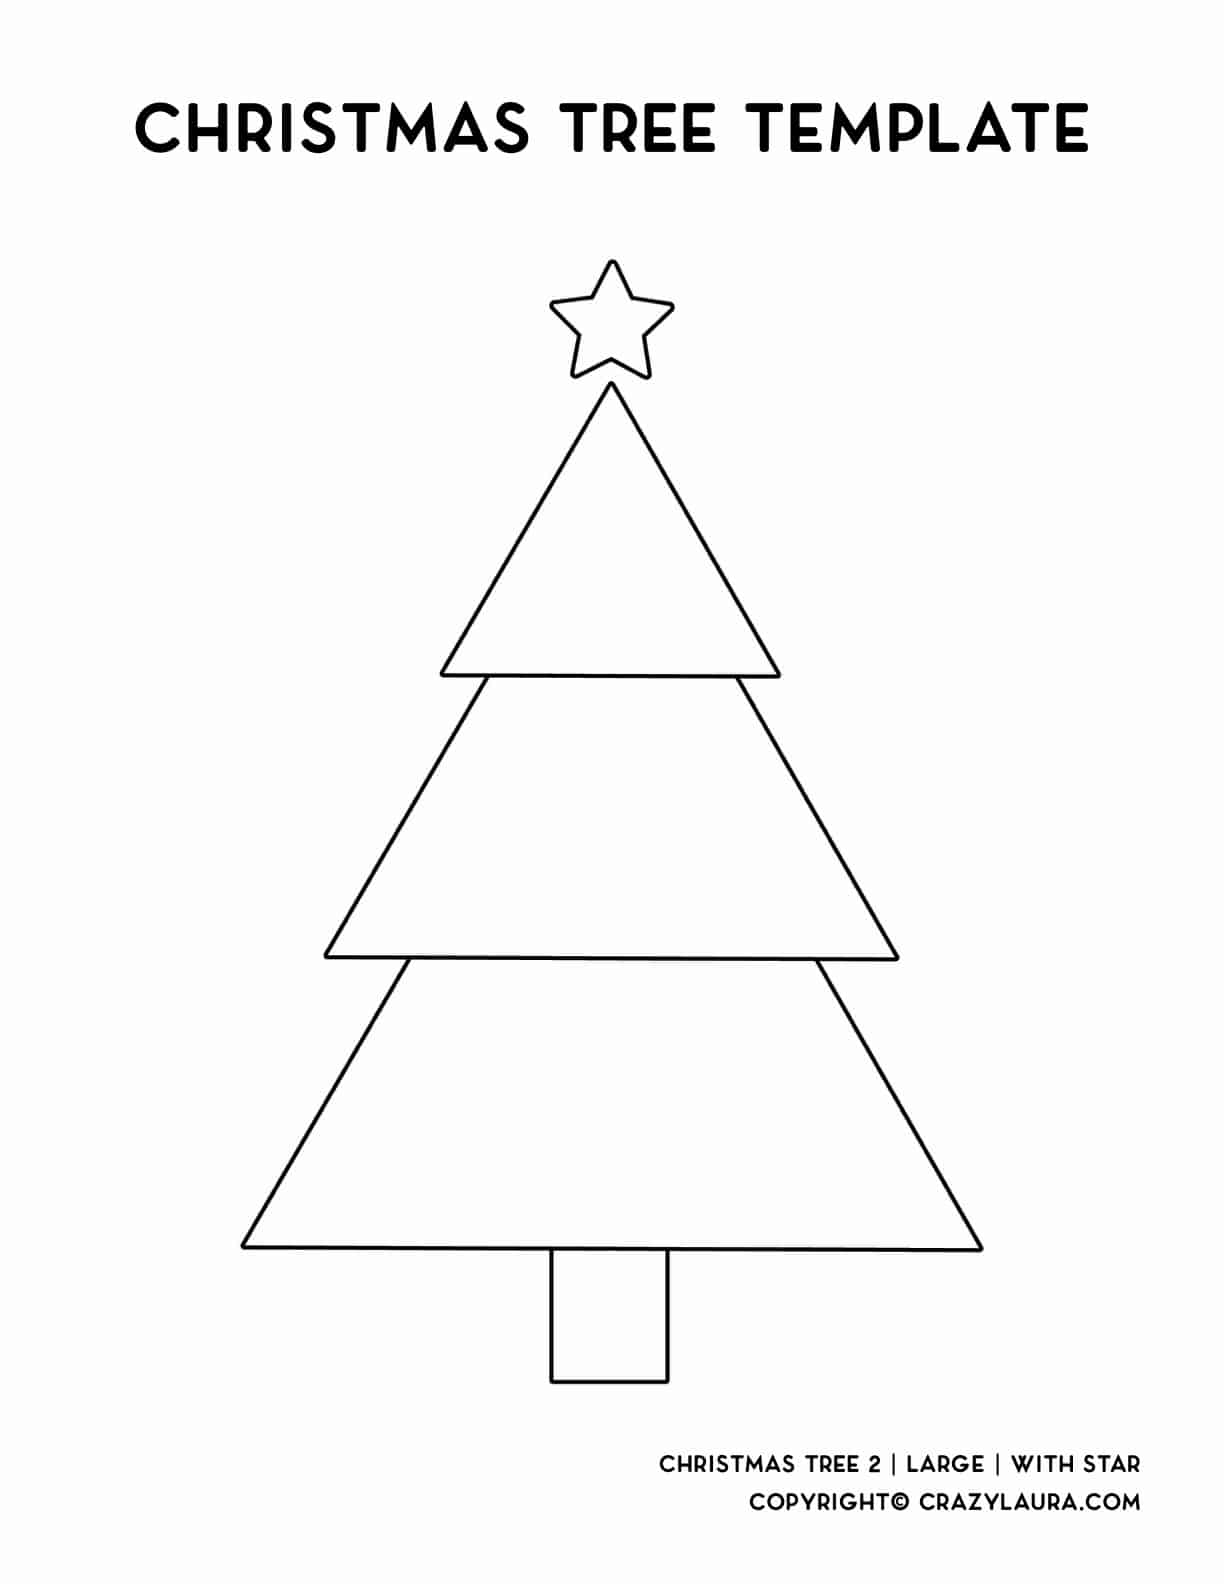 free cut out tracing sheet for holiday tree